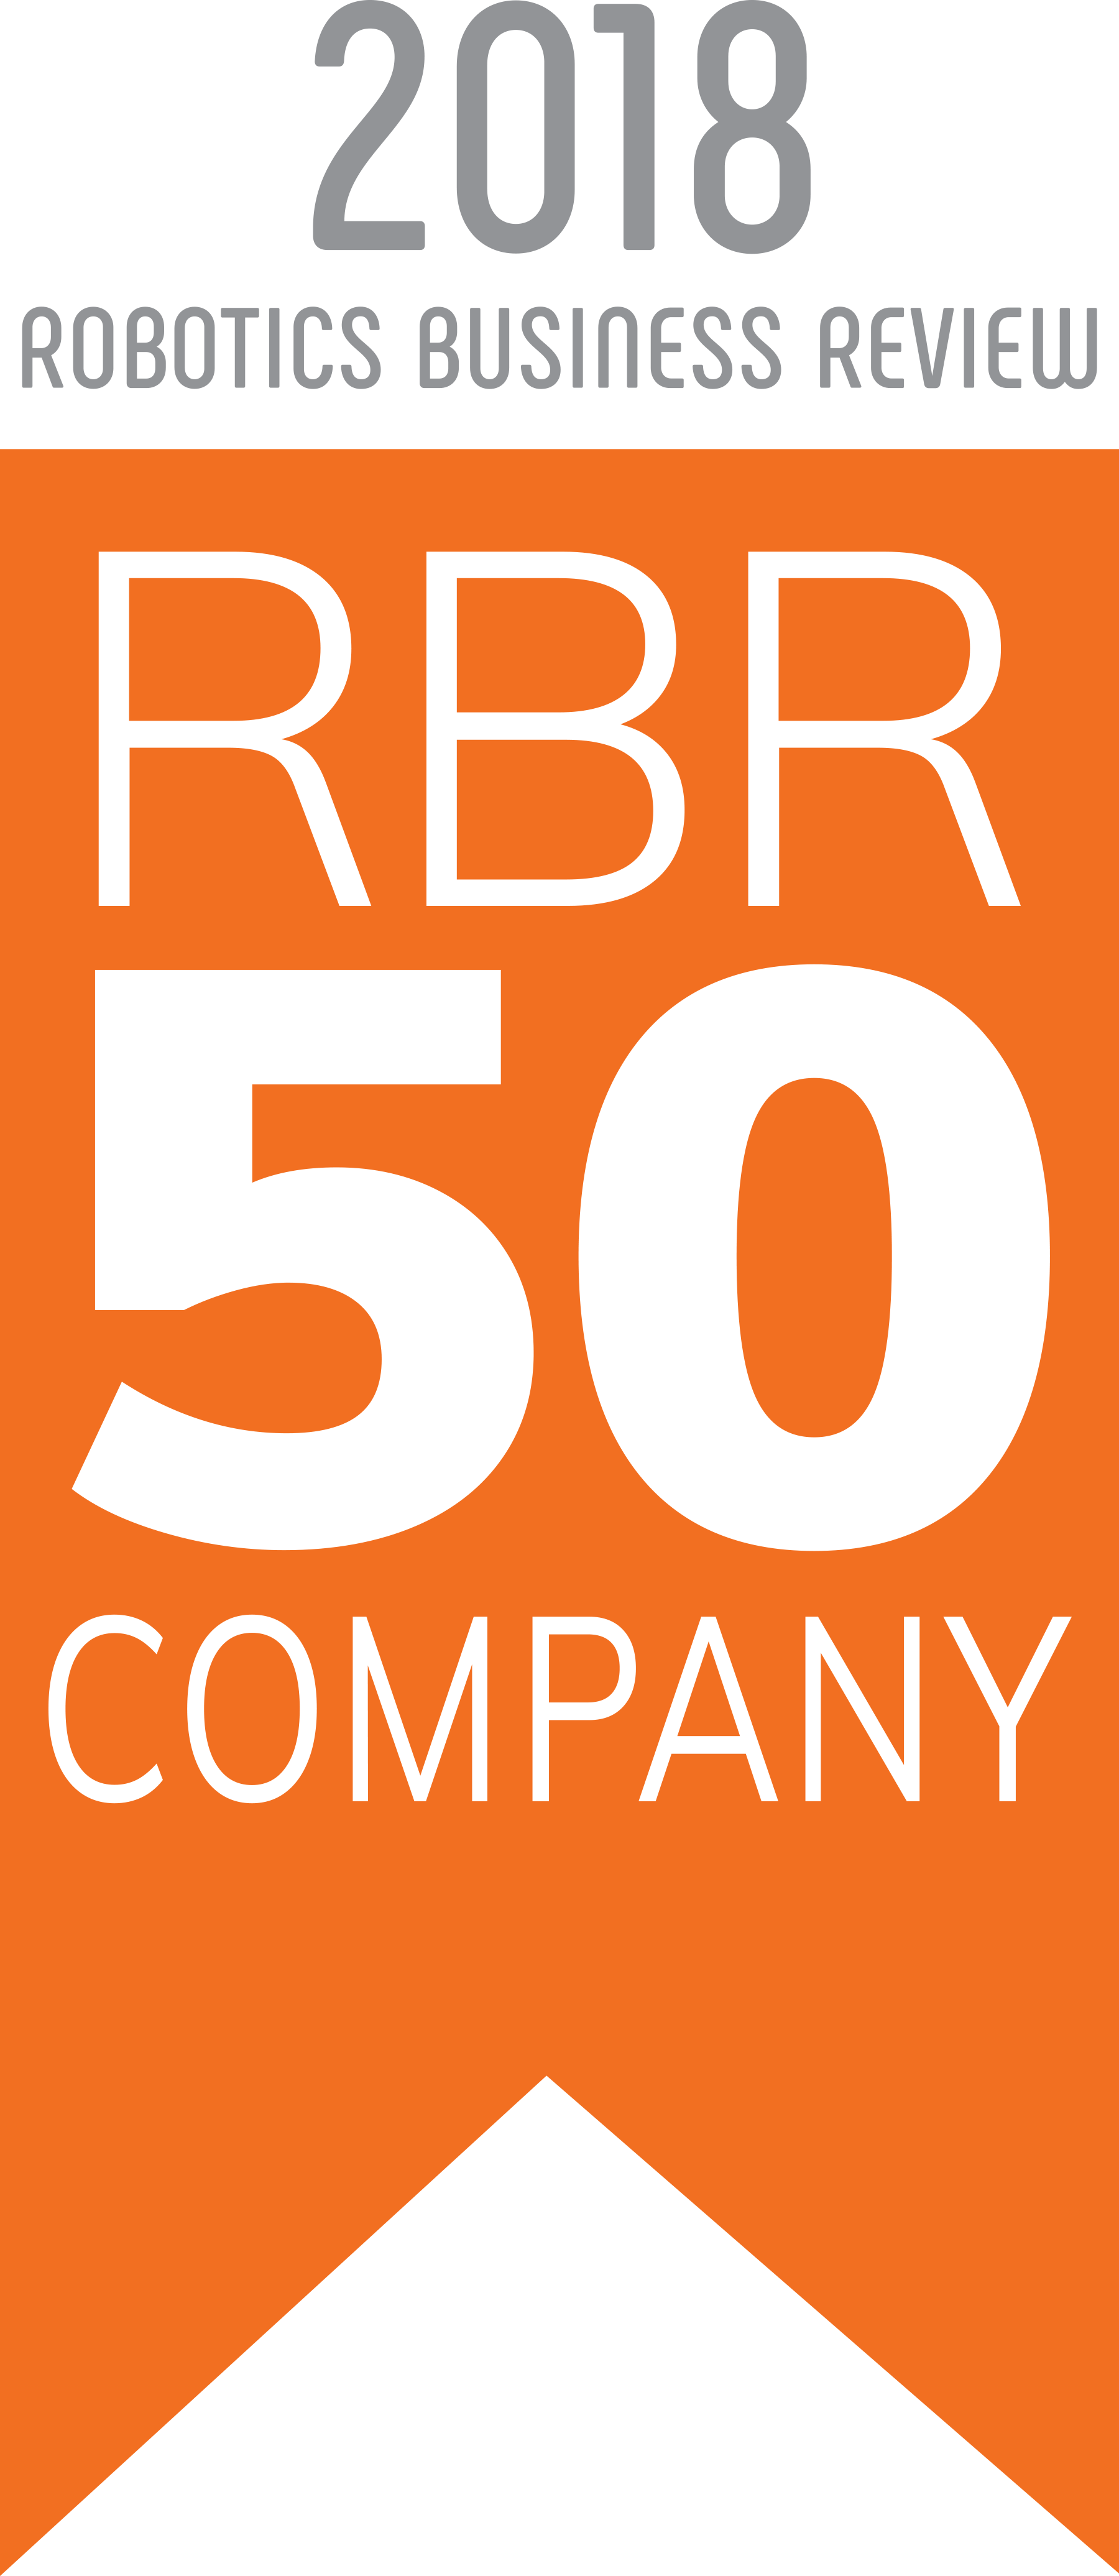 Robotiq Named One of the Top 50 Most Influential Companies in Robotics!